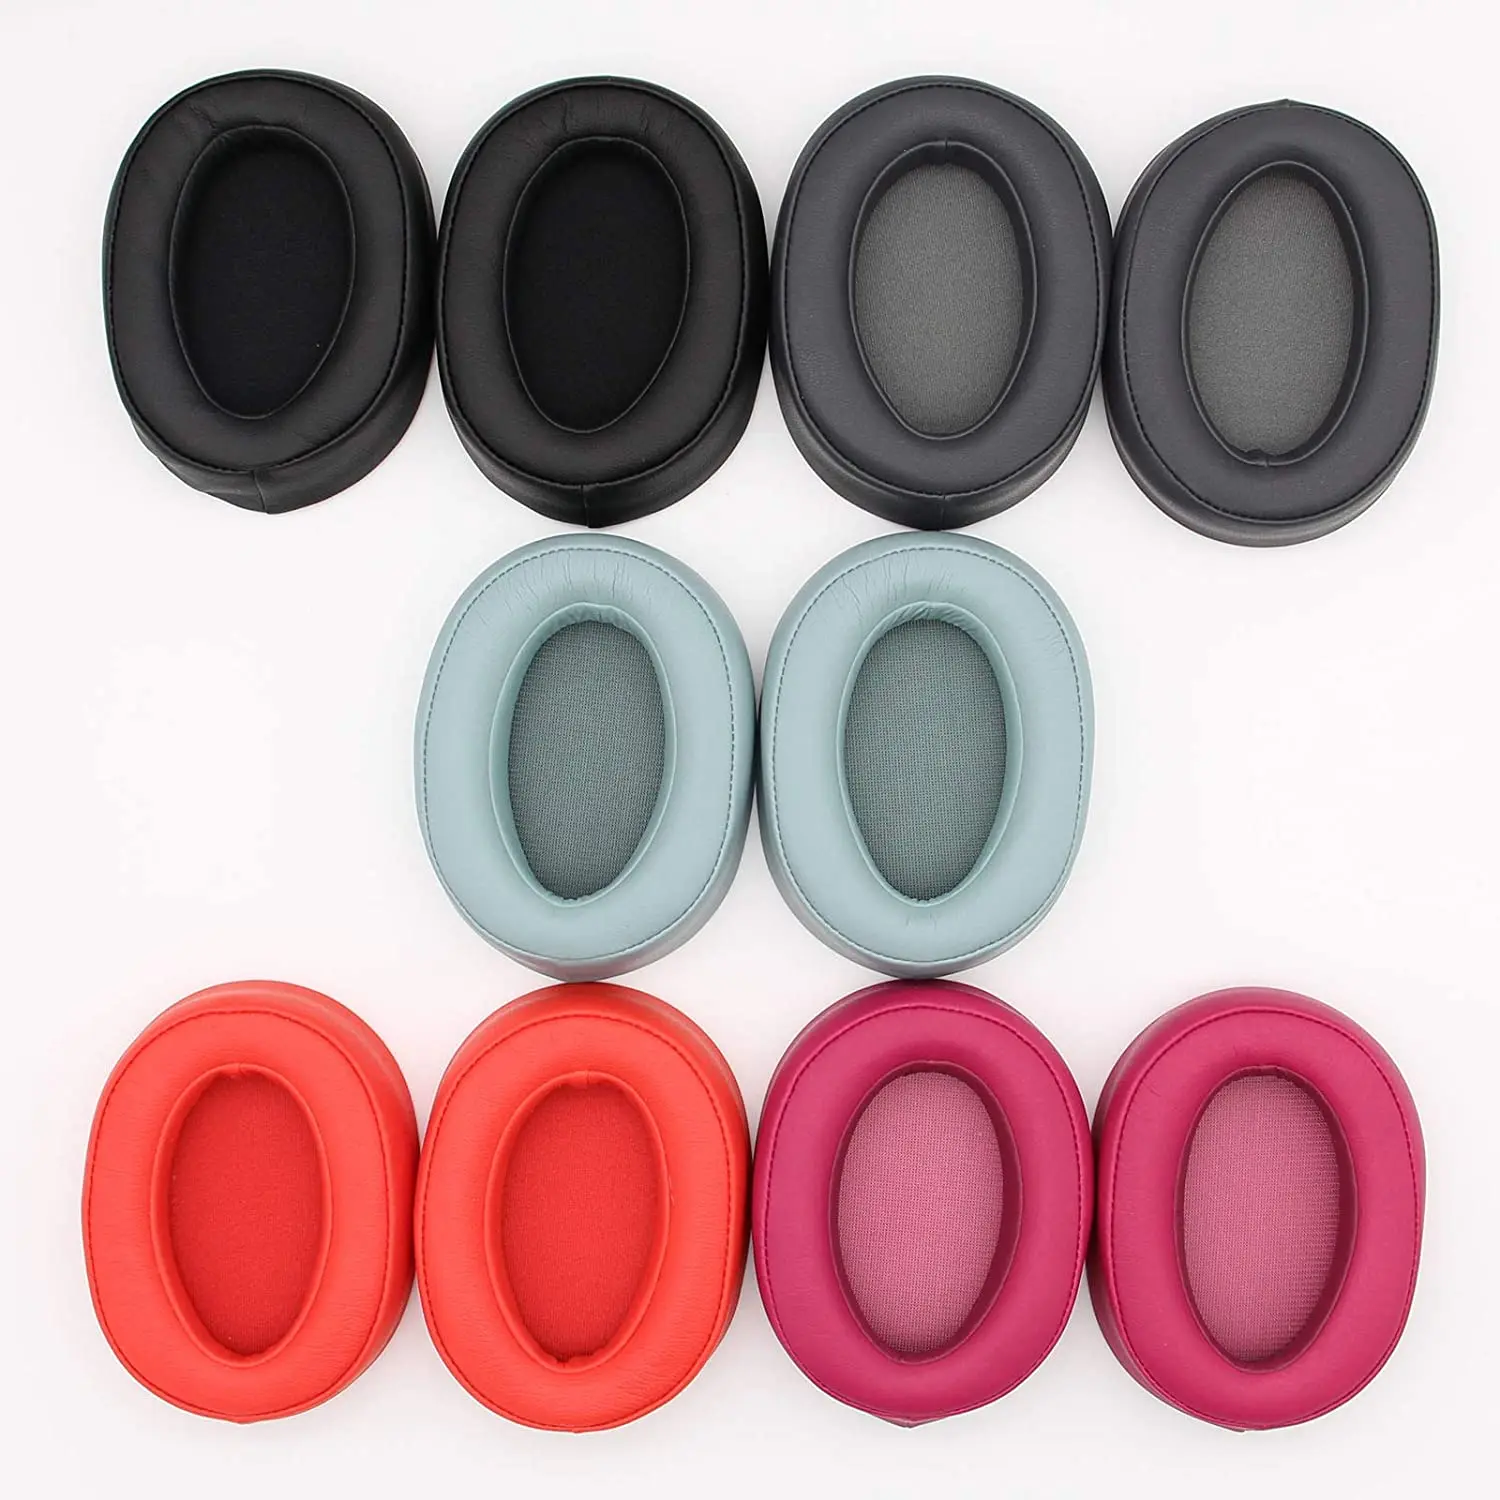 

MDR-100ABN Replacement Ear Pads Protein PU Leather Ear Cushion Compatible with Sony MDR-100ABN WH-H900N H800 Headphones